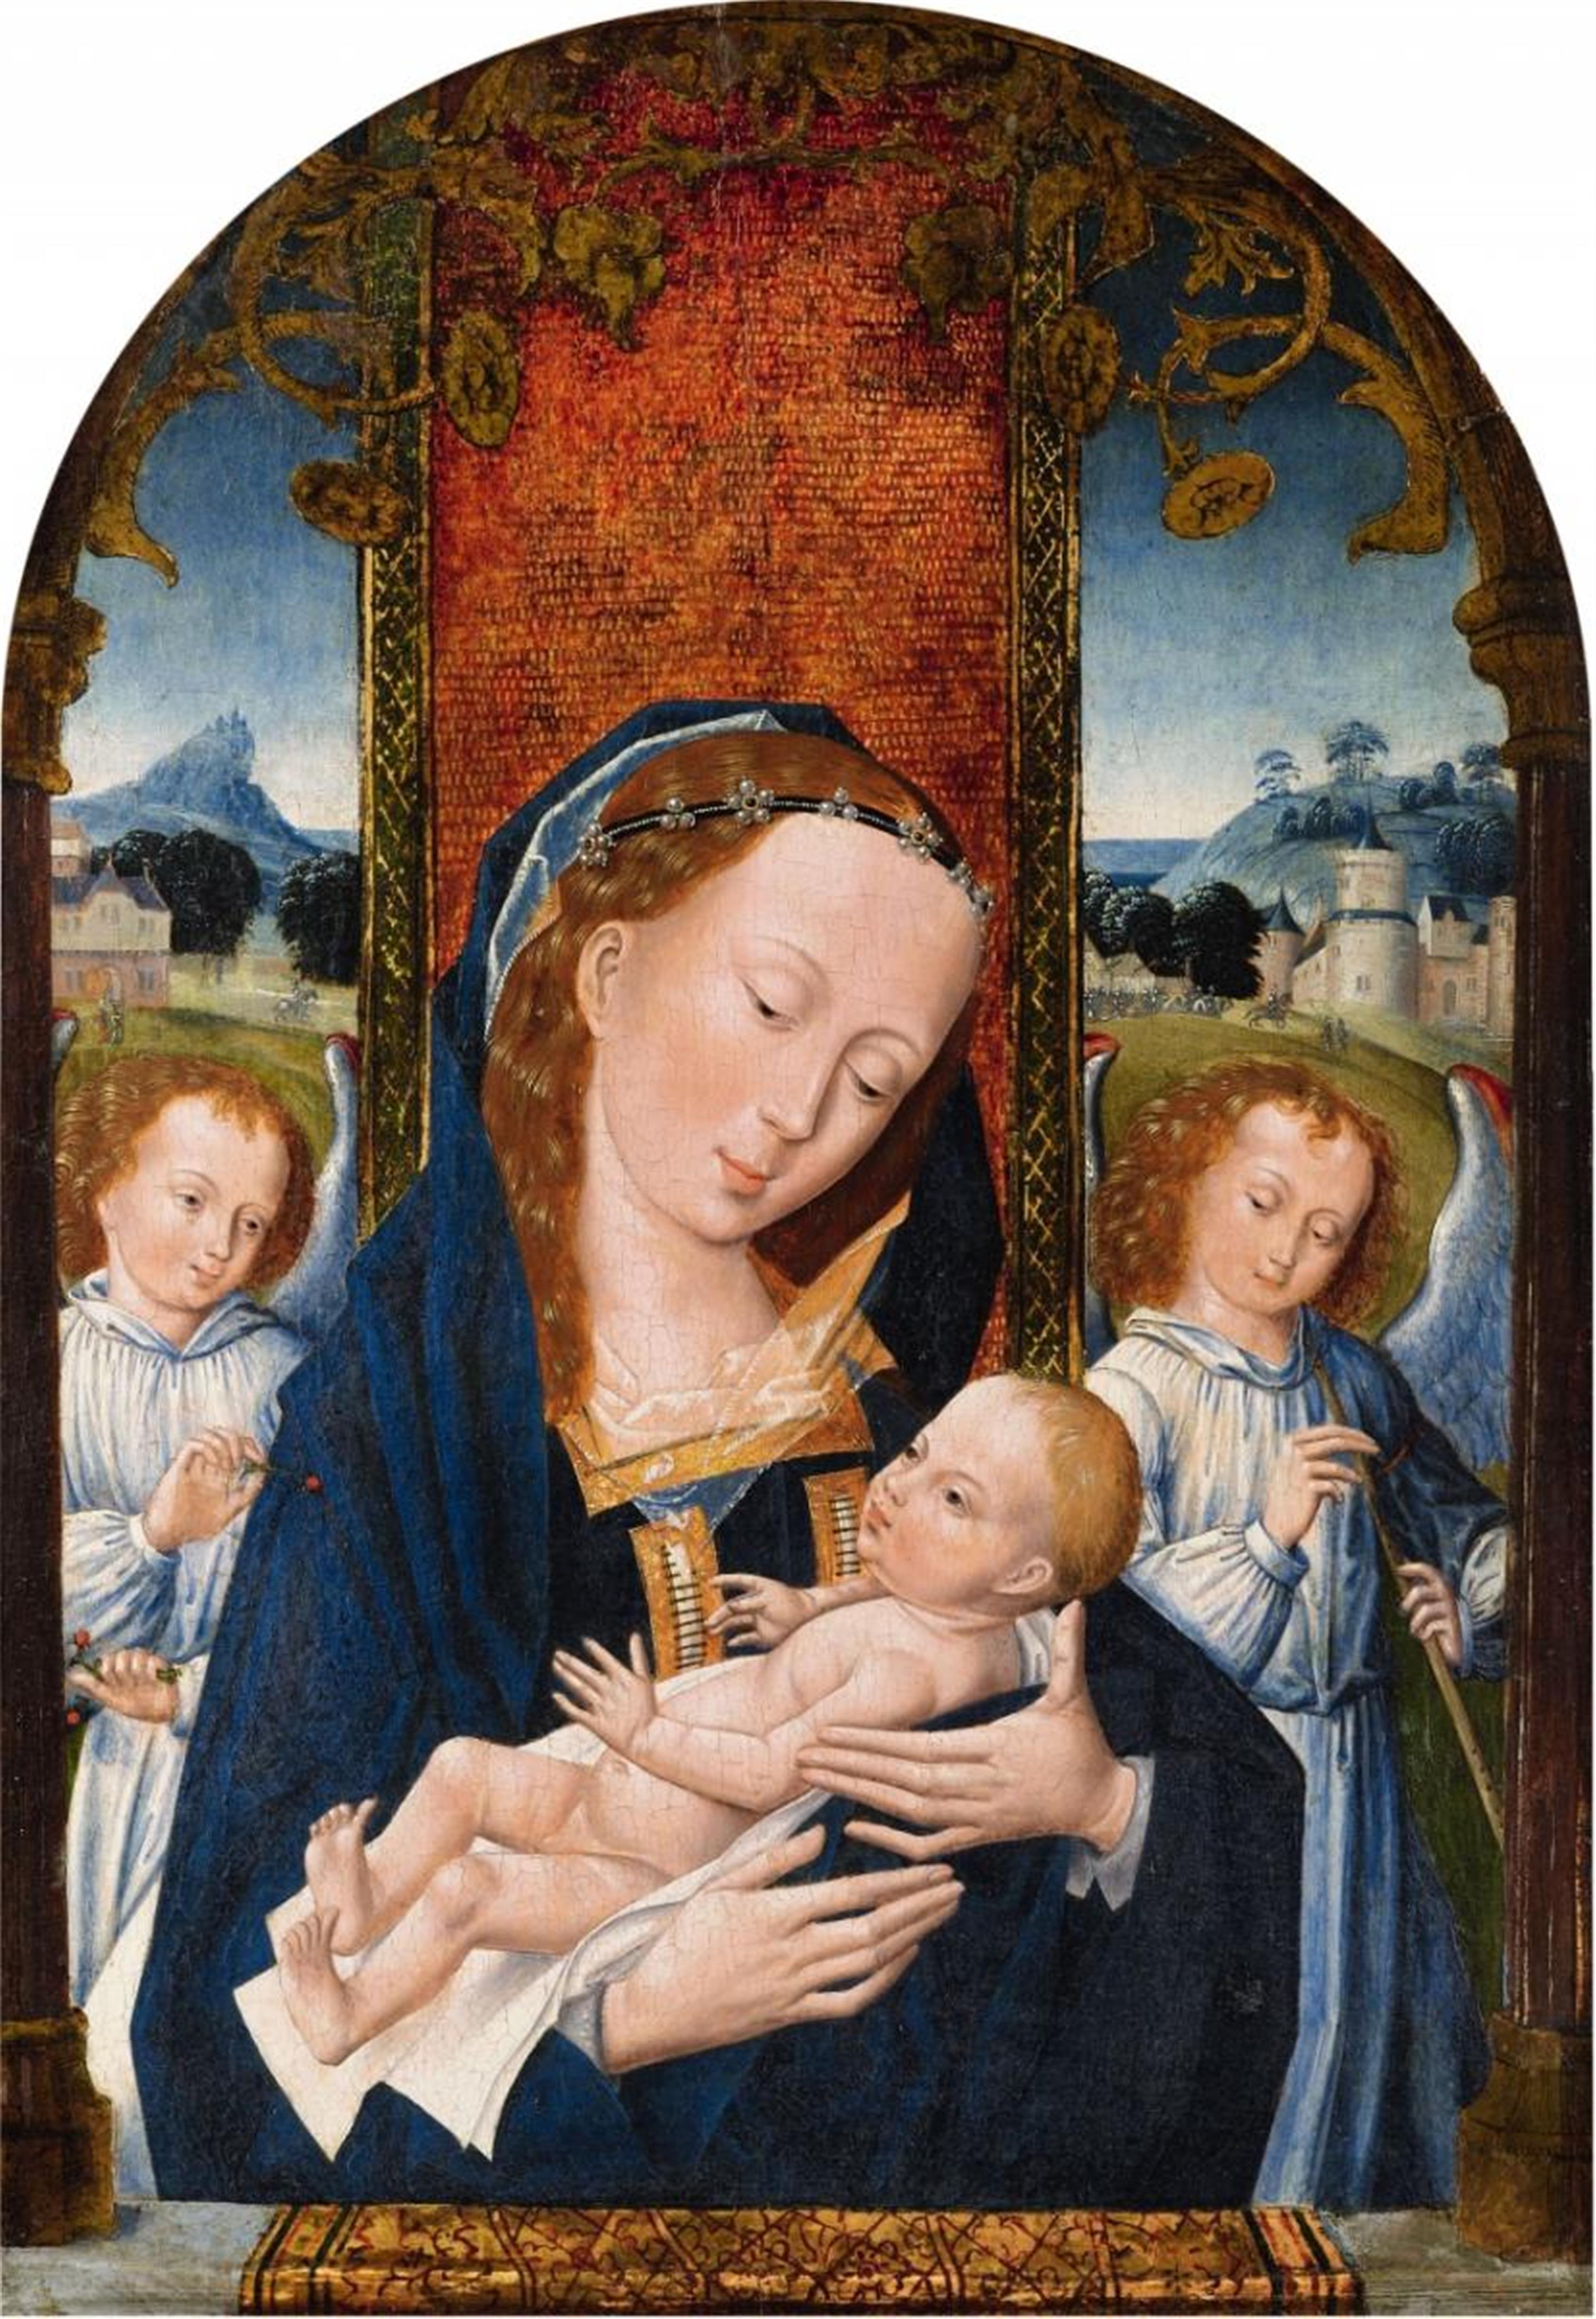 Flemish School probably 16th century - The Virgin and Child with Angels - image-1